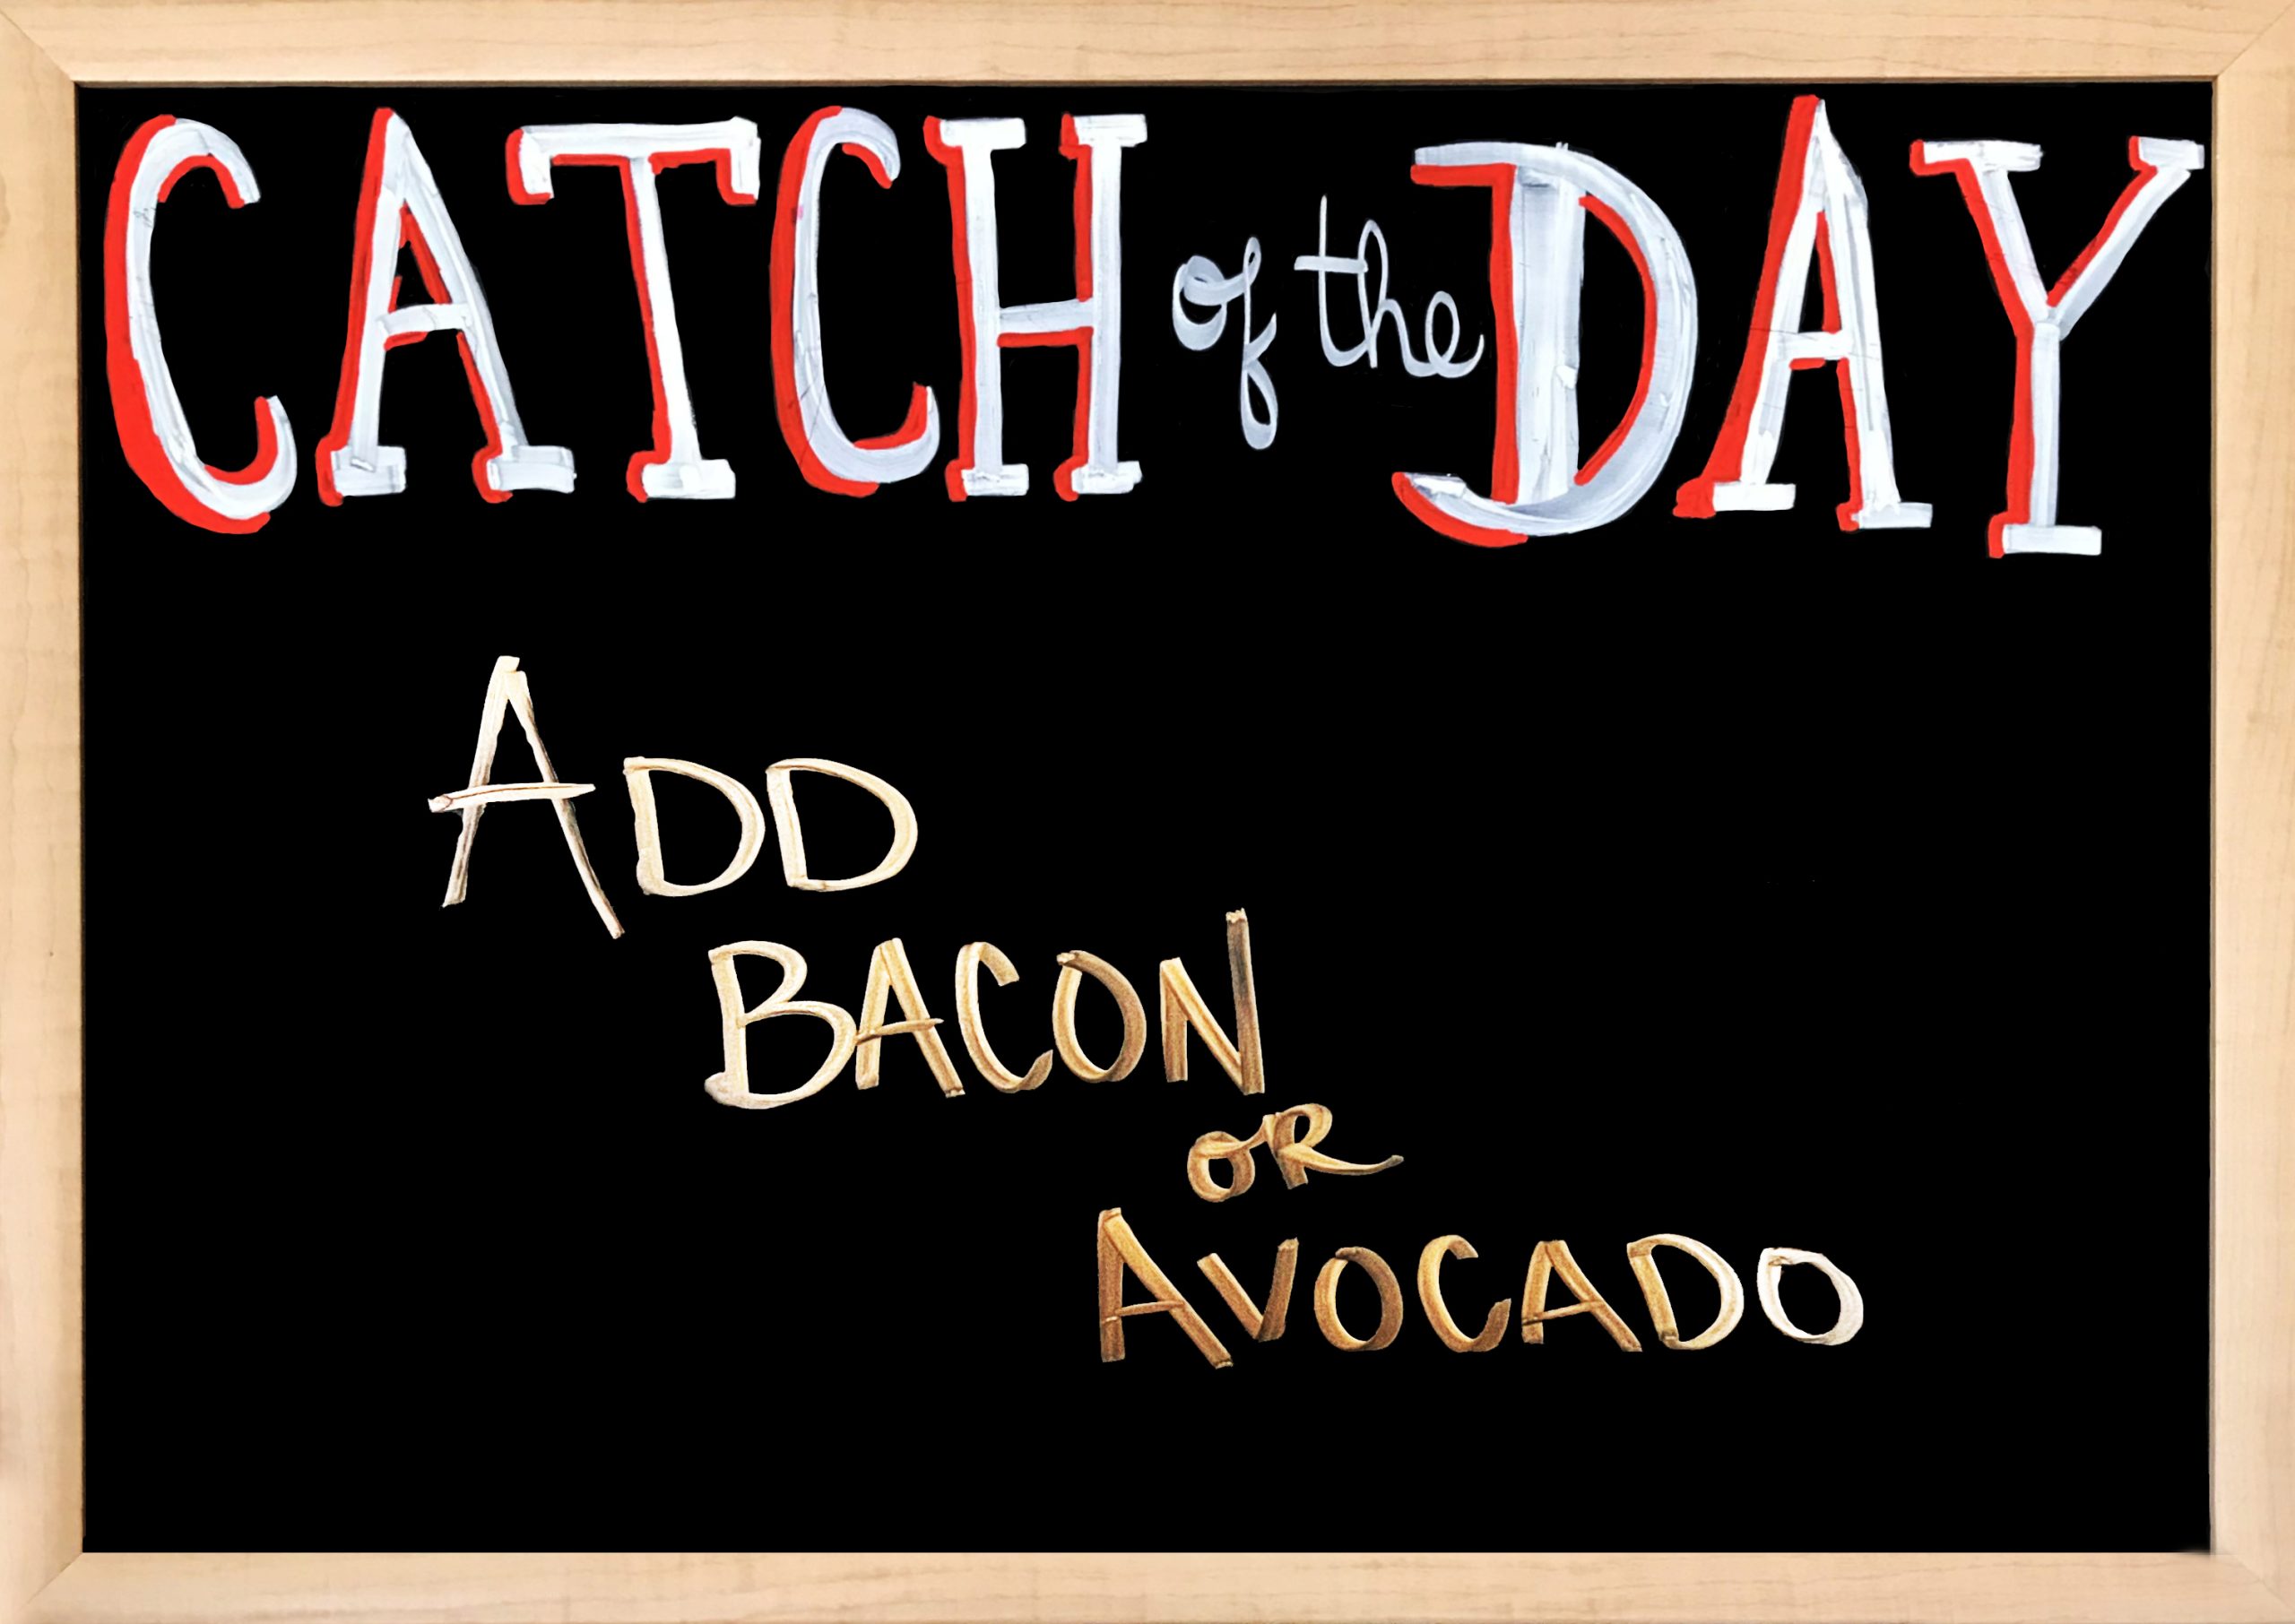 Catch a Fish on your "McBoodery Fishing License" today when you add Bacon or Avocado.